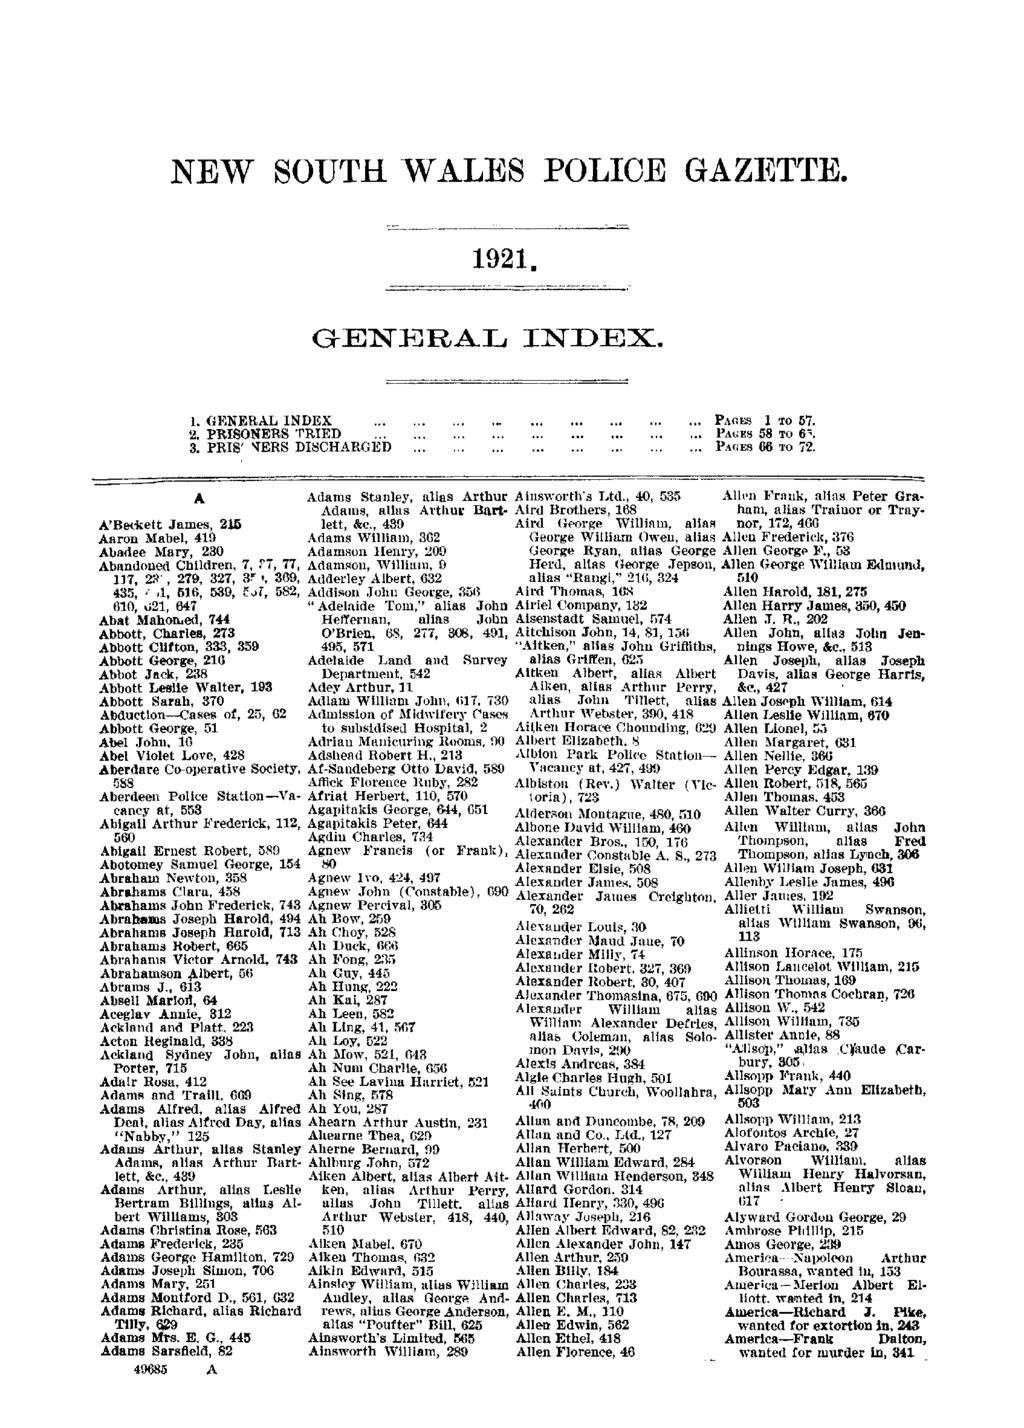 NEW SOUTH WALES POLICE GAZETTE. 1921. GENERAL INDEX. 1. GENERAL INDEX...... 2. PRISONERS 'T'RIED... 3. PRIG' STERS DISCHARGED... PACES 1 TO 57.... PAGES 58 To 6... PAGES 66 TO 72.